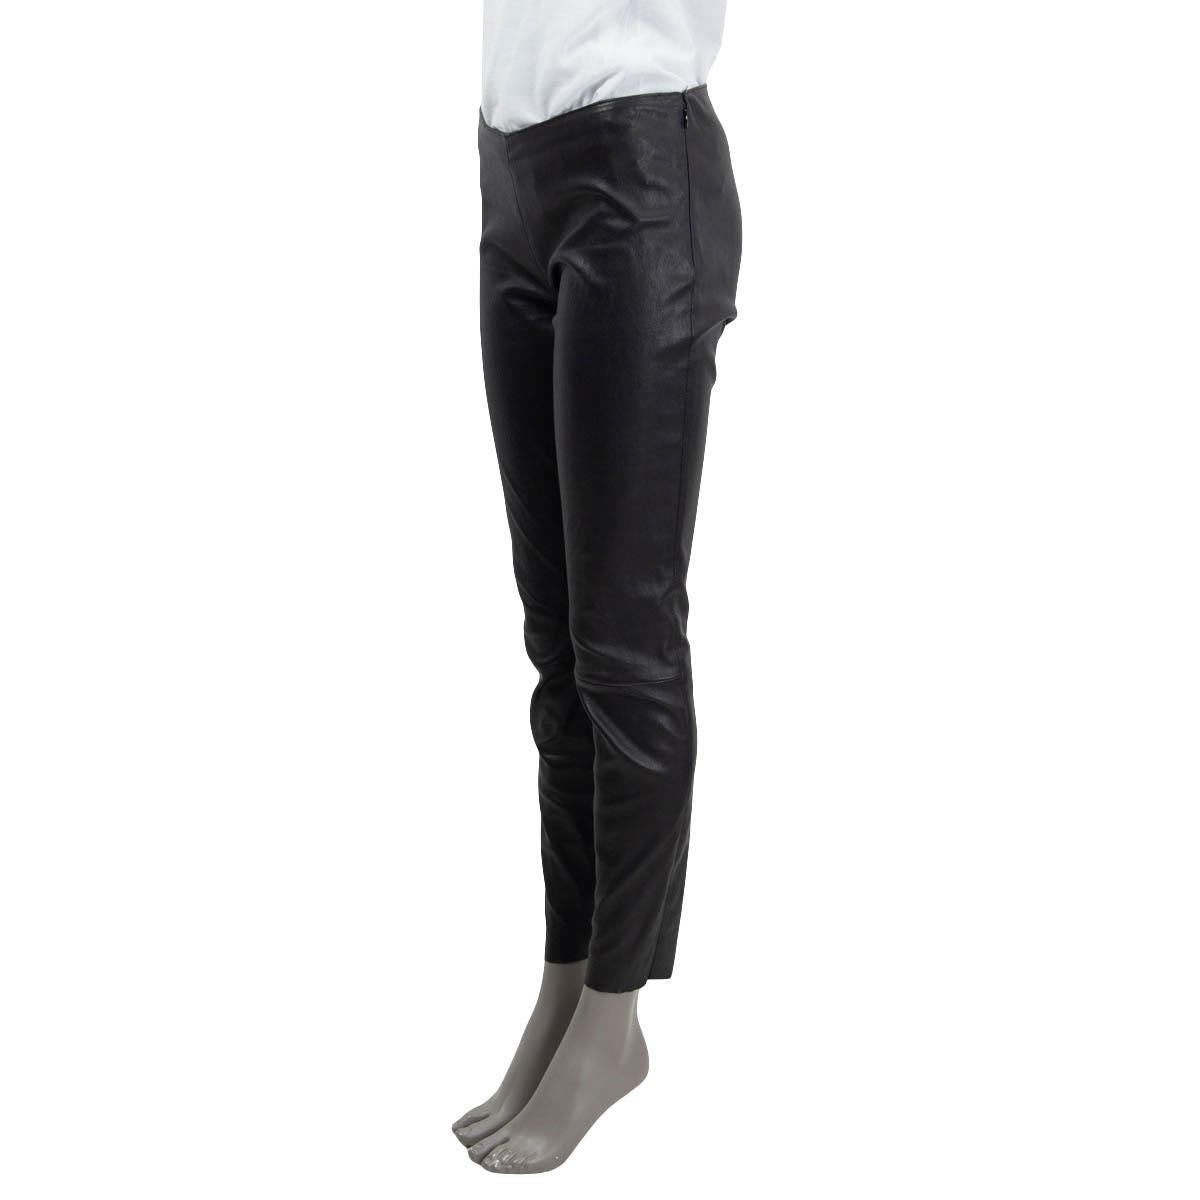 100% authentic Jitrois pants in black lamb leather (100%). Feature zipped cuffs. Open with a concealed zipper and a hook on the side. Lined in black cotton (97%) and spandex (3%). Have been worn and are in excellent condition.

Measurements
Tag